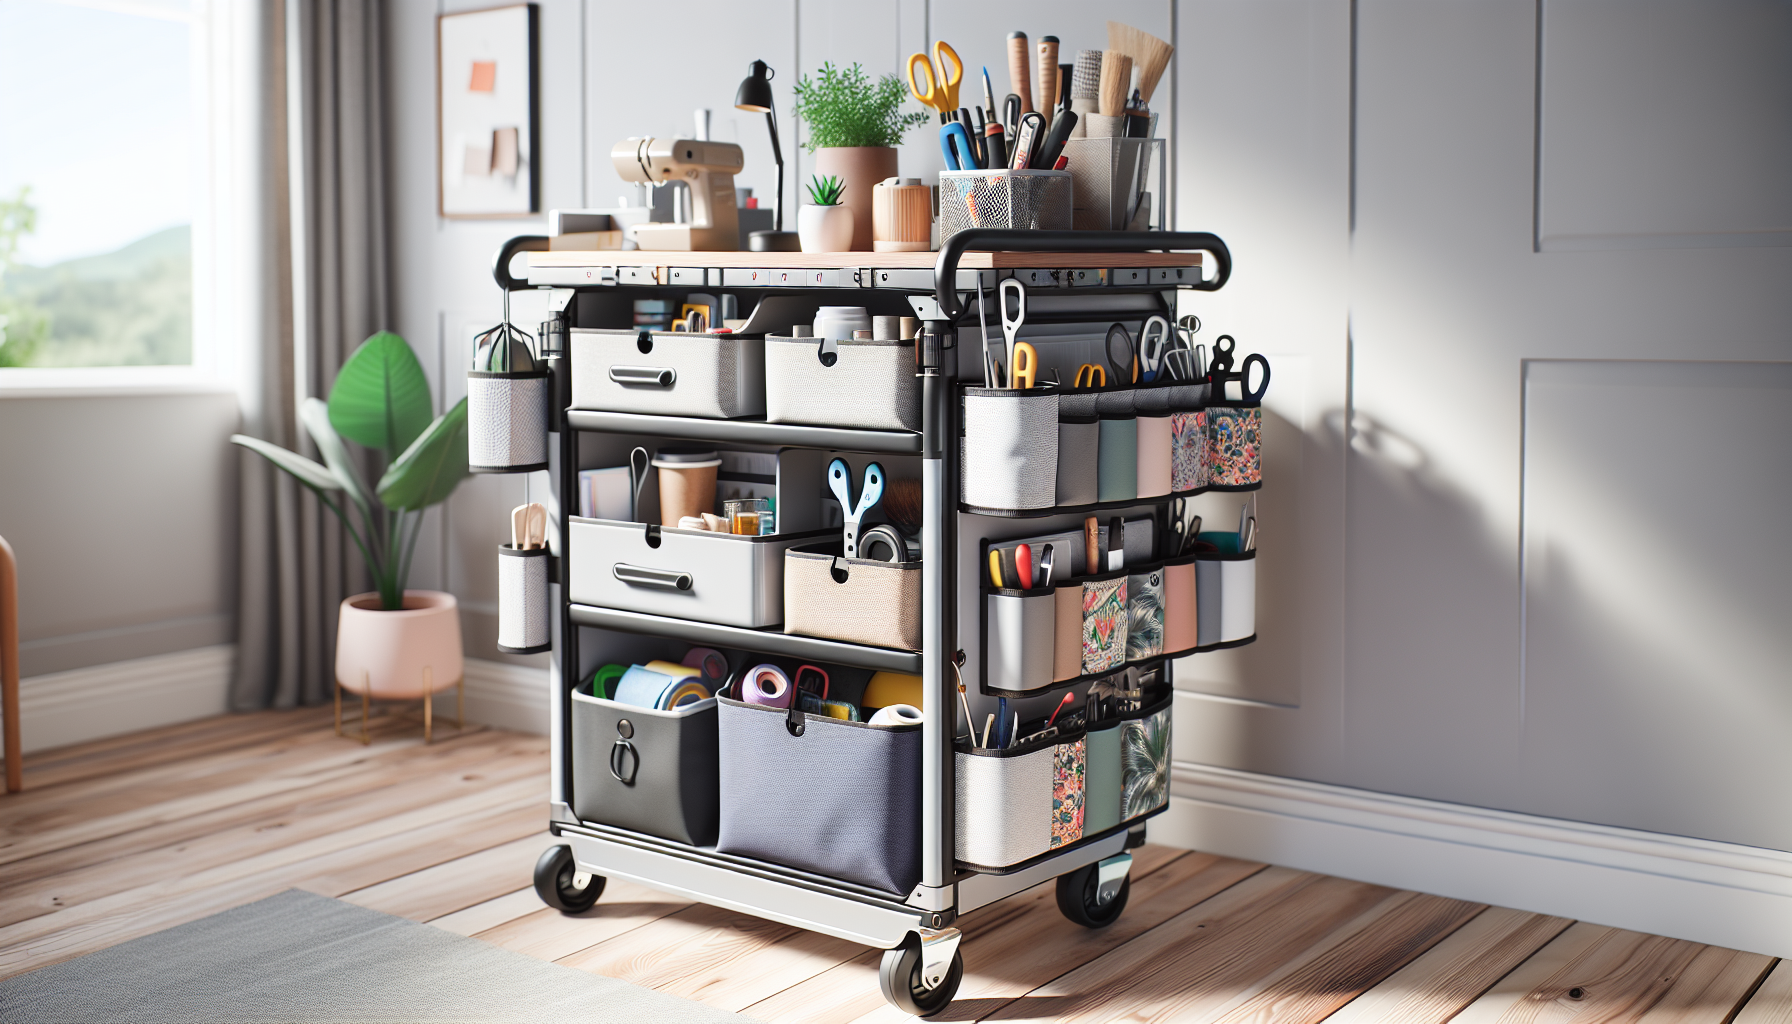 Customized utility cart with organizational accessories